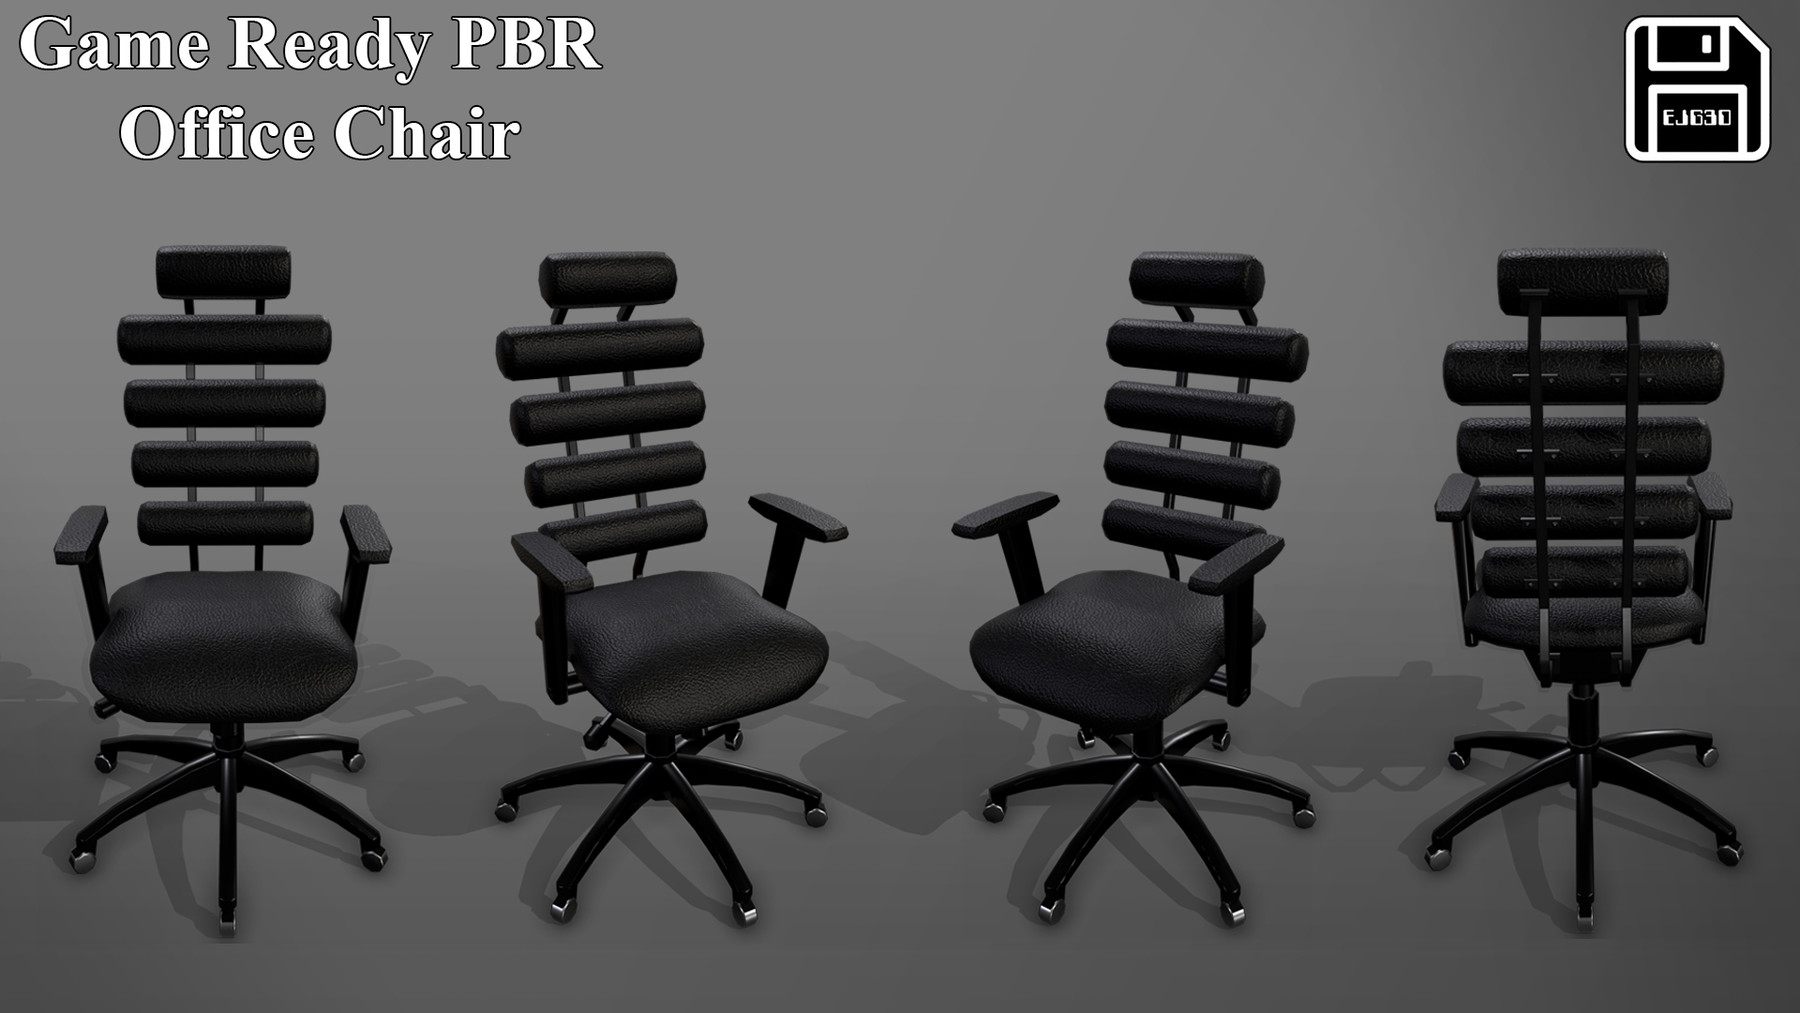 ArtStation - Game Ready PBR Leather Office Chair | Game Assets